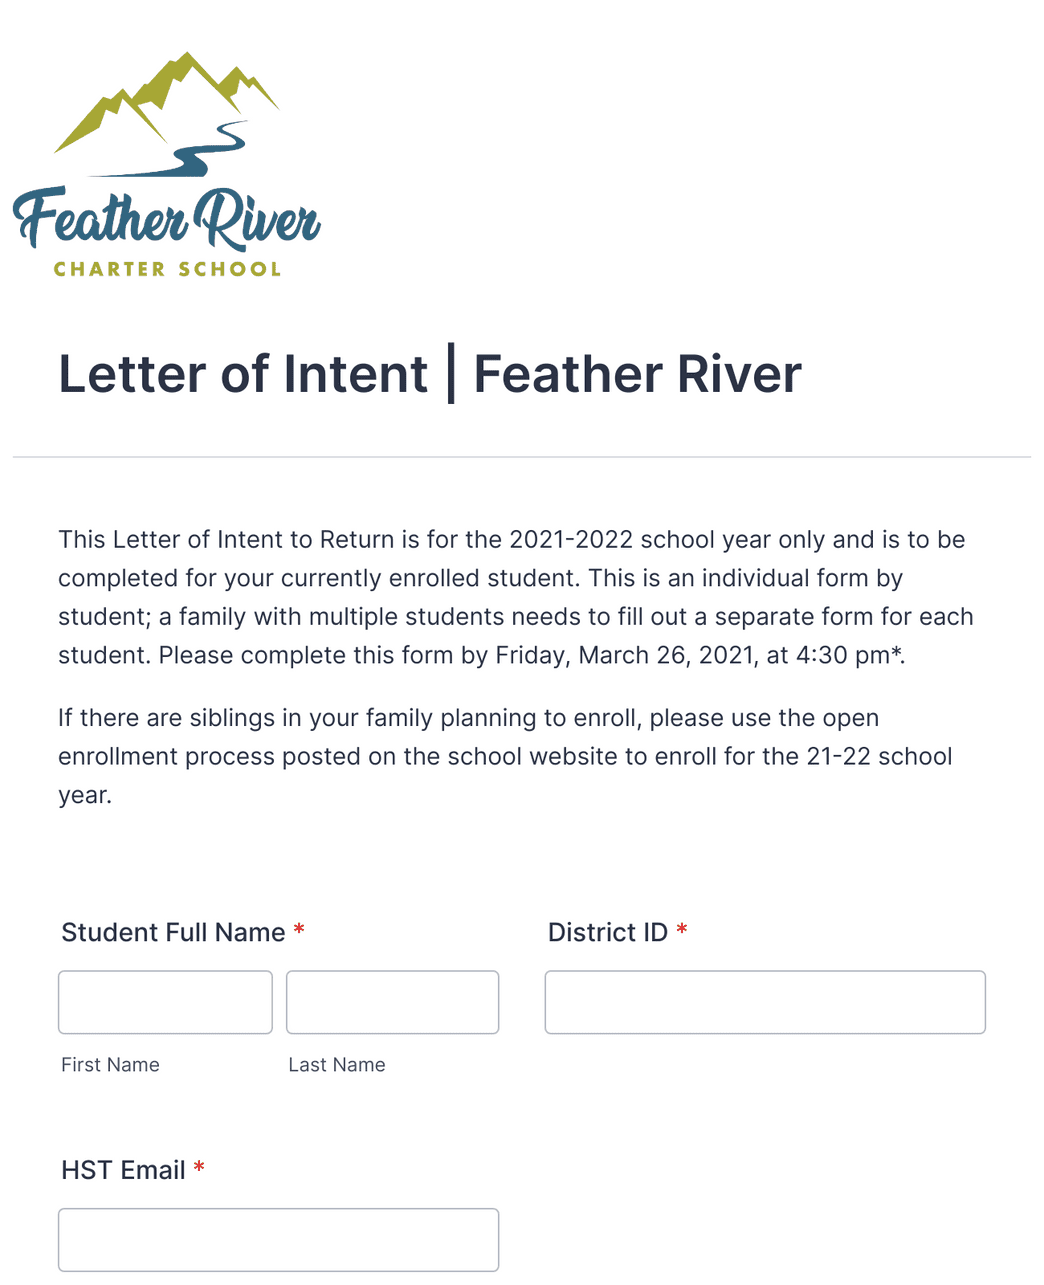 Letter Of Intent Feather River Charter School Form Template Jotform 1243